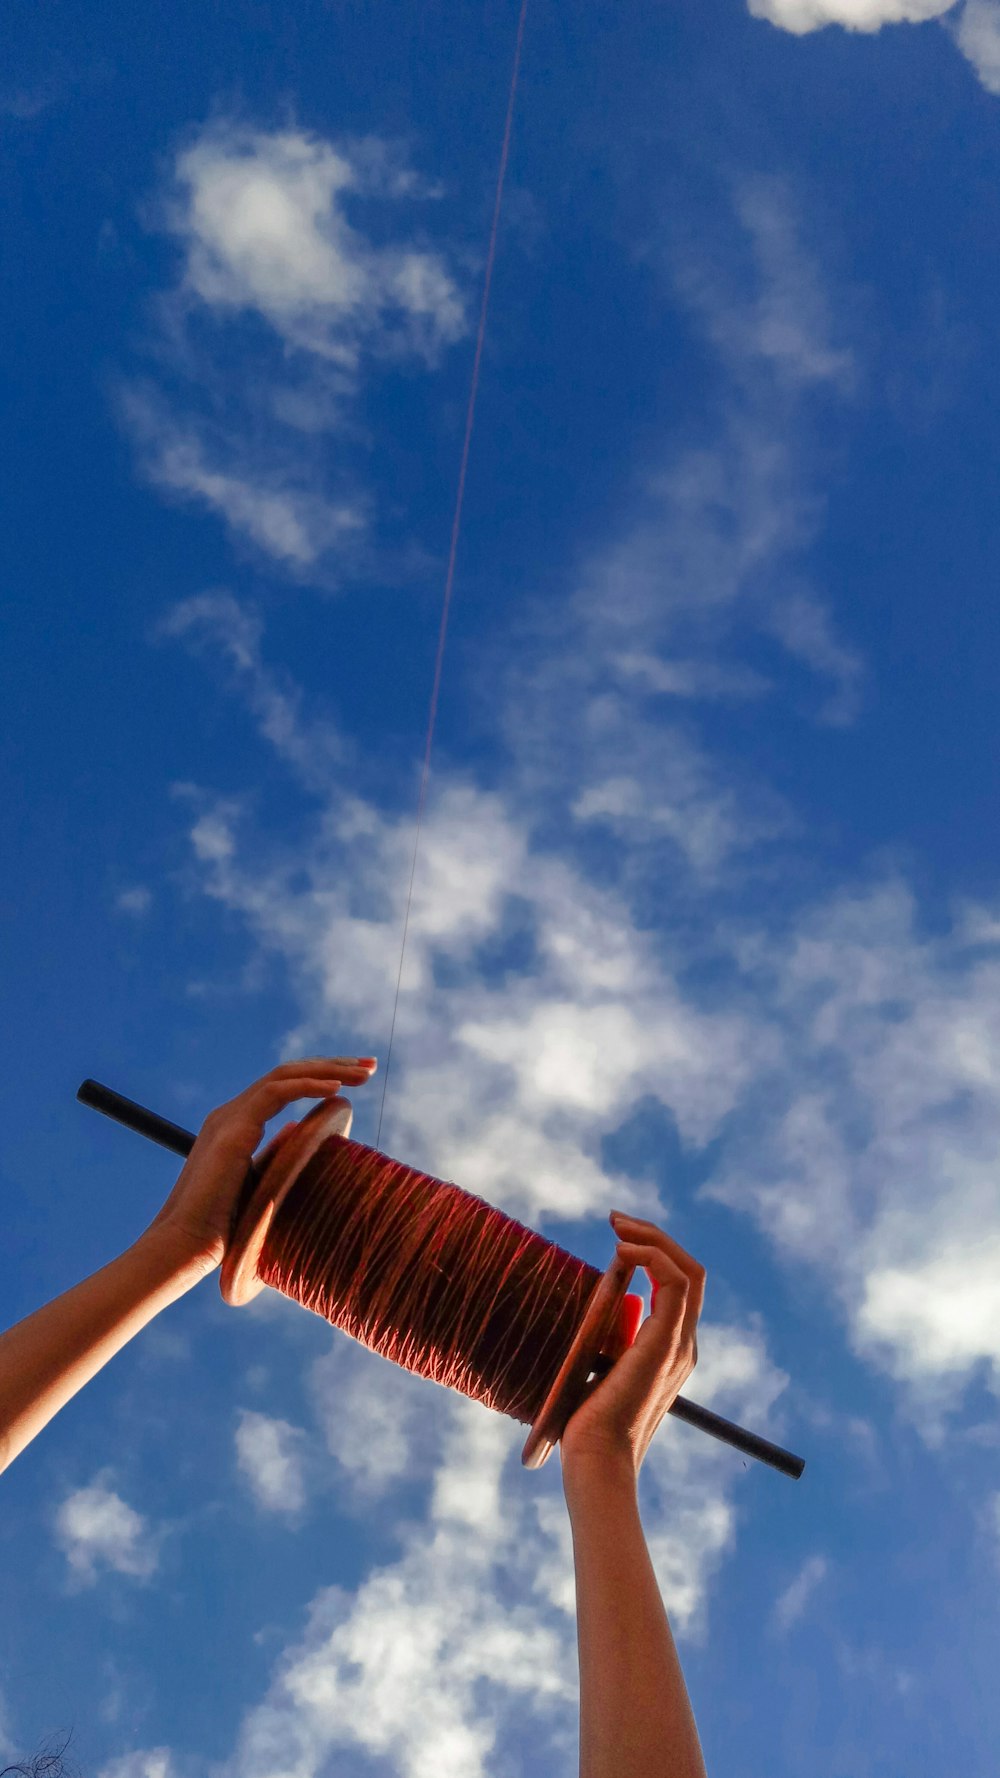 low-angle photo of kite thread spool under cloudy sky